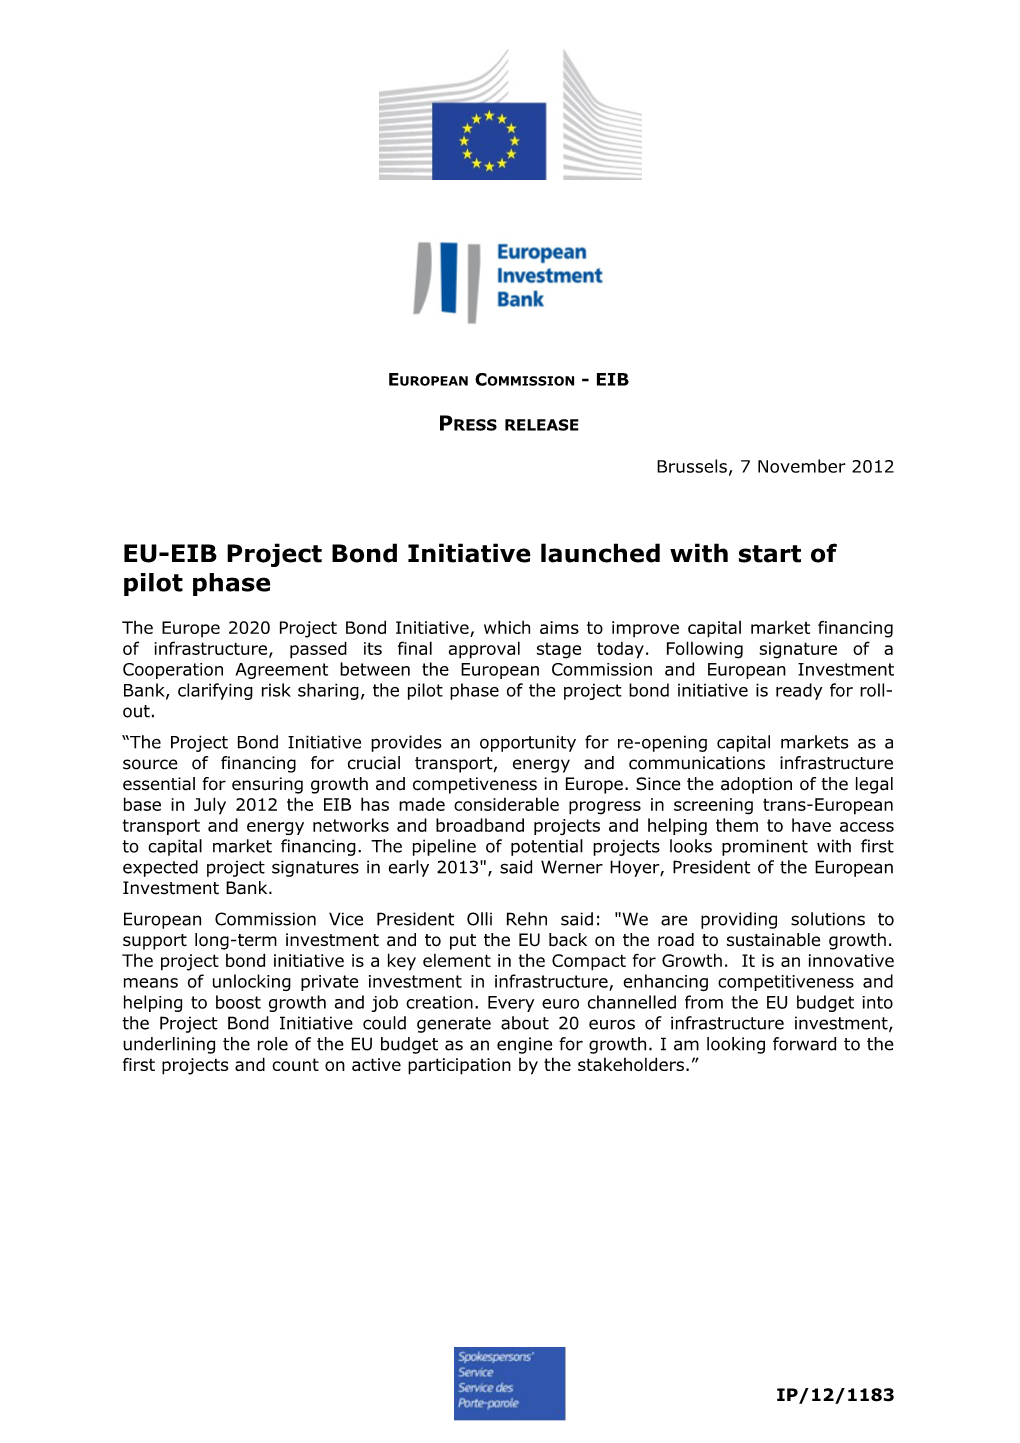 EU-EIB Project Bond Initiative Launched with Start of Pilot Phase